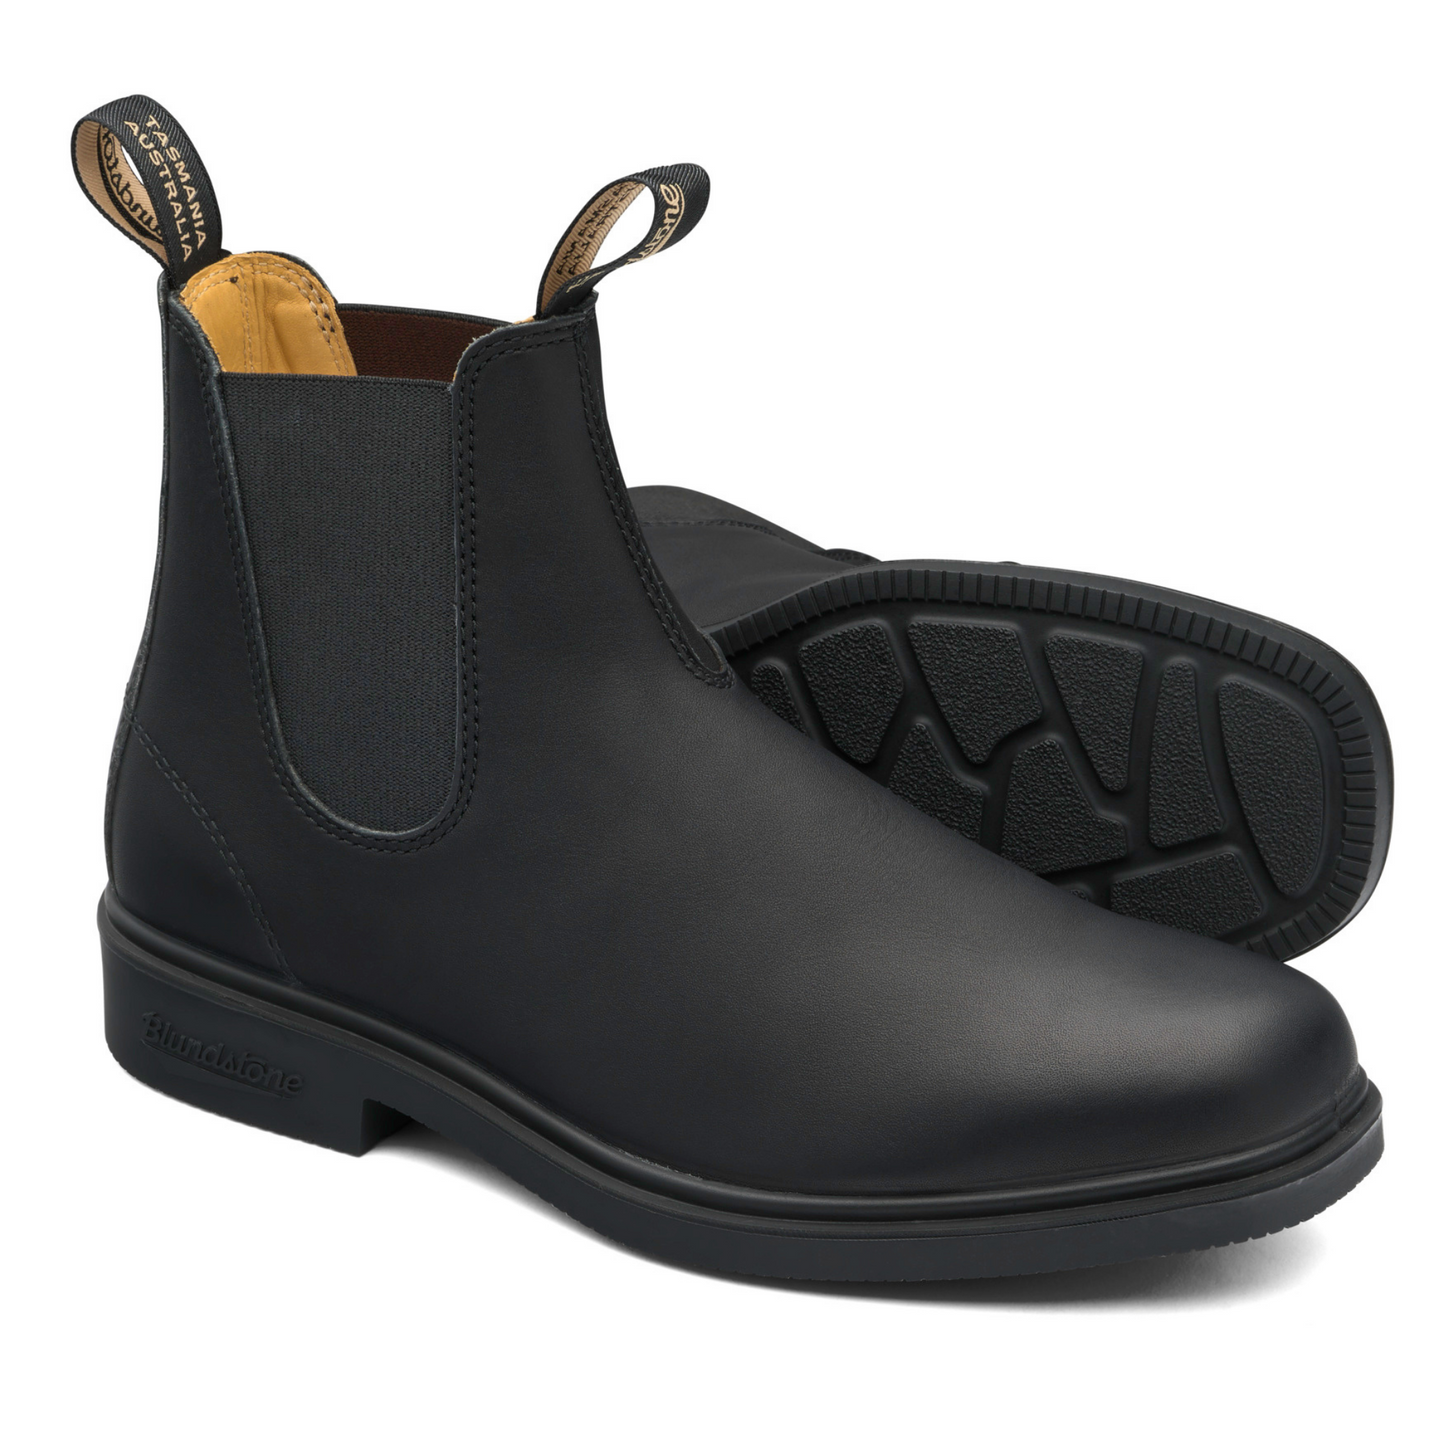 A pair of all black leather boots. Low heel, black sole with tan coloured interior lining.